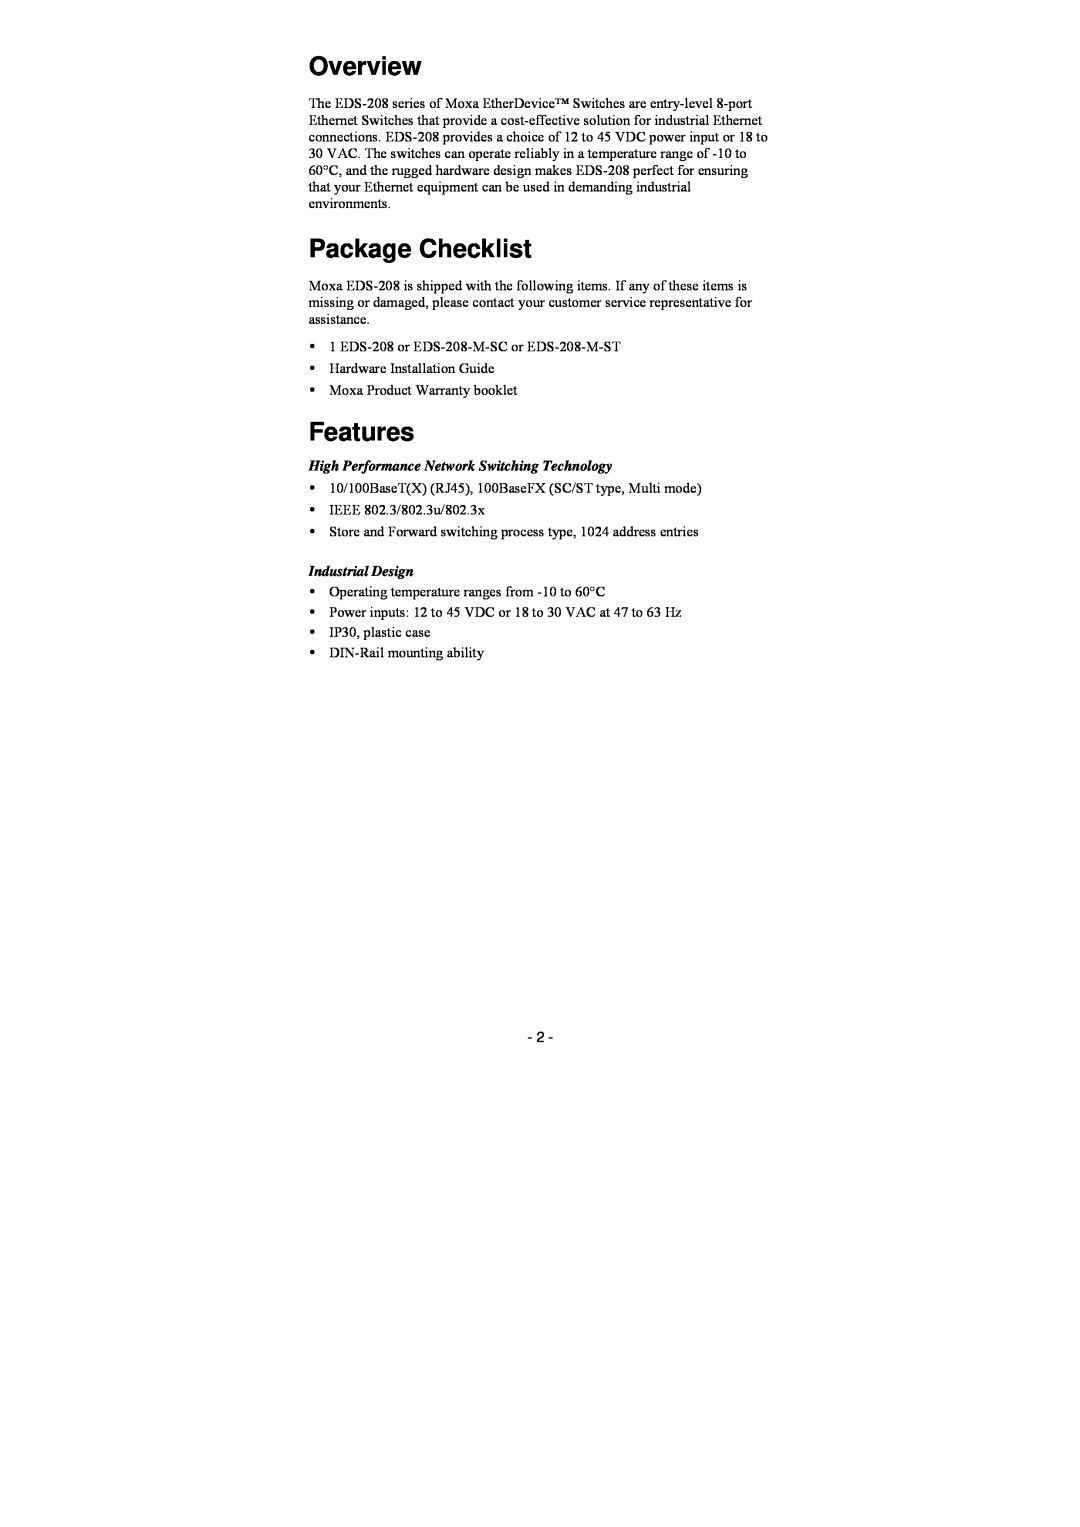 Moxa Technologies EDS-208 manual Overview, Package Checklist, Features, High Performance Network Switching Technology 